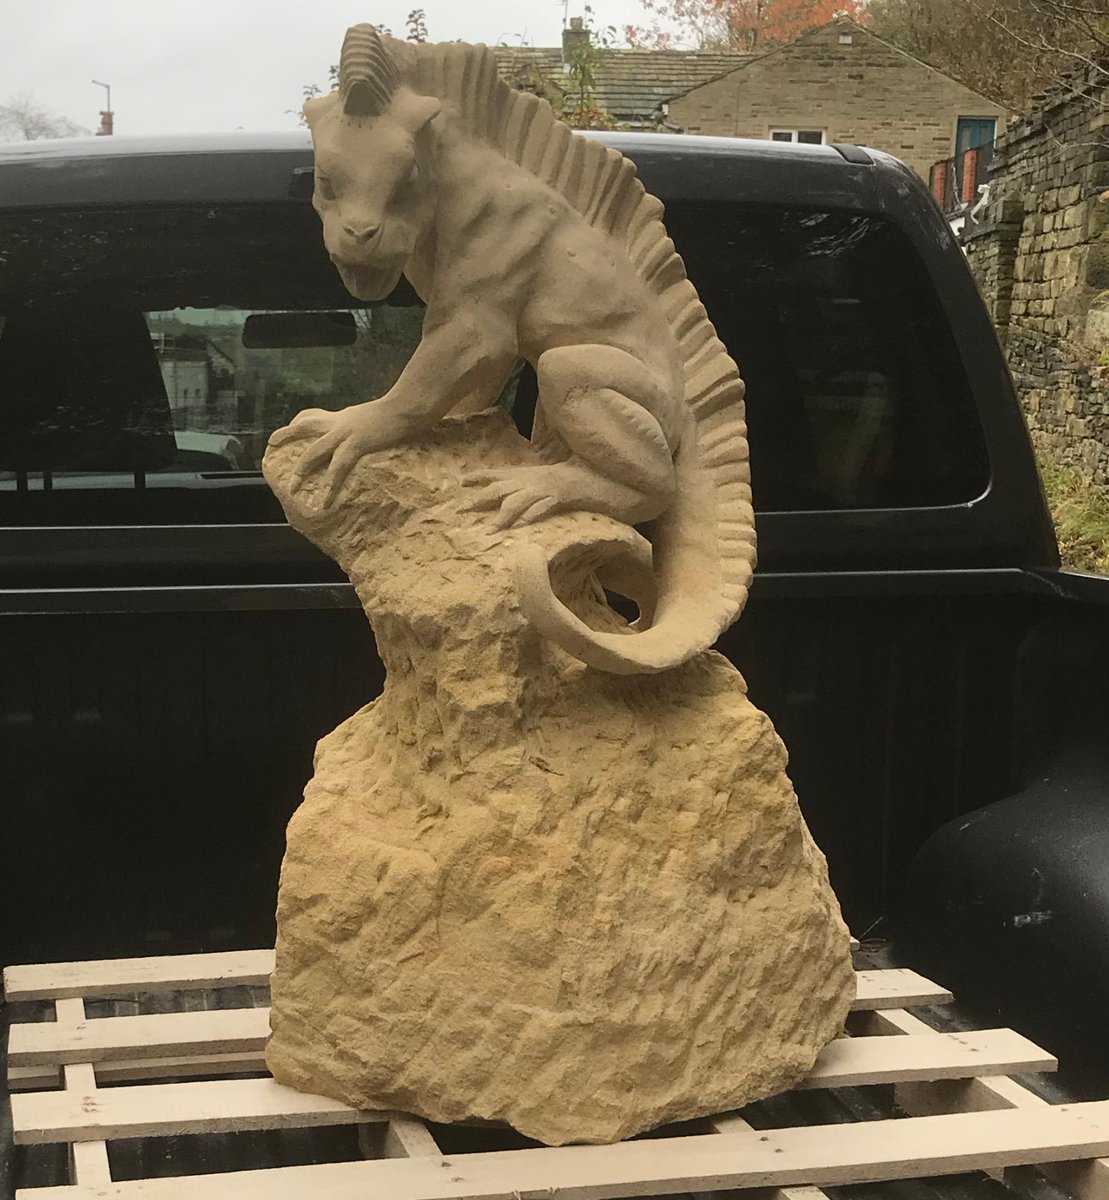 Something a little bit different!

This bespoke #WittonFellSandstone dragon allowed our stonemason to really show his flair for traditional carving!🙌

This lovely creature is now happily in its new home! 

#yorkshire #uk #stonemasons #stonecarving #bespokestone #stonesupplies